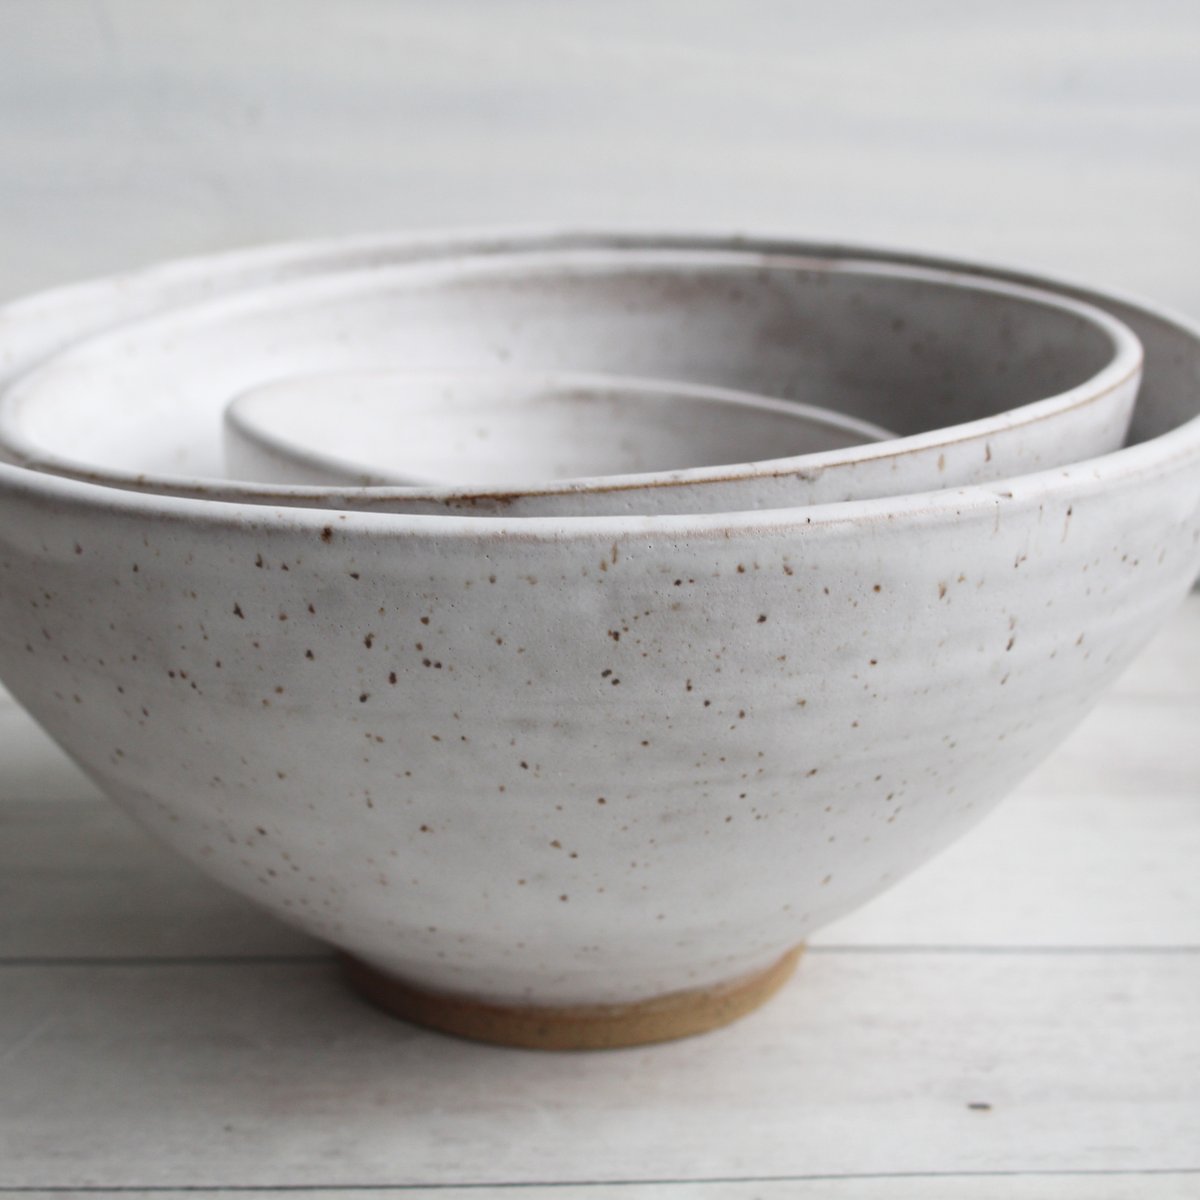 Andover Pottery — Rustic Raw Stoneware Prep Bowl in Brown Speckled Glaze  Handcrafted in USA